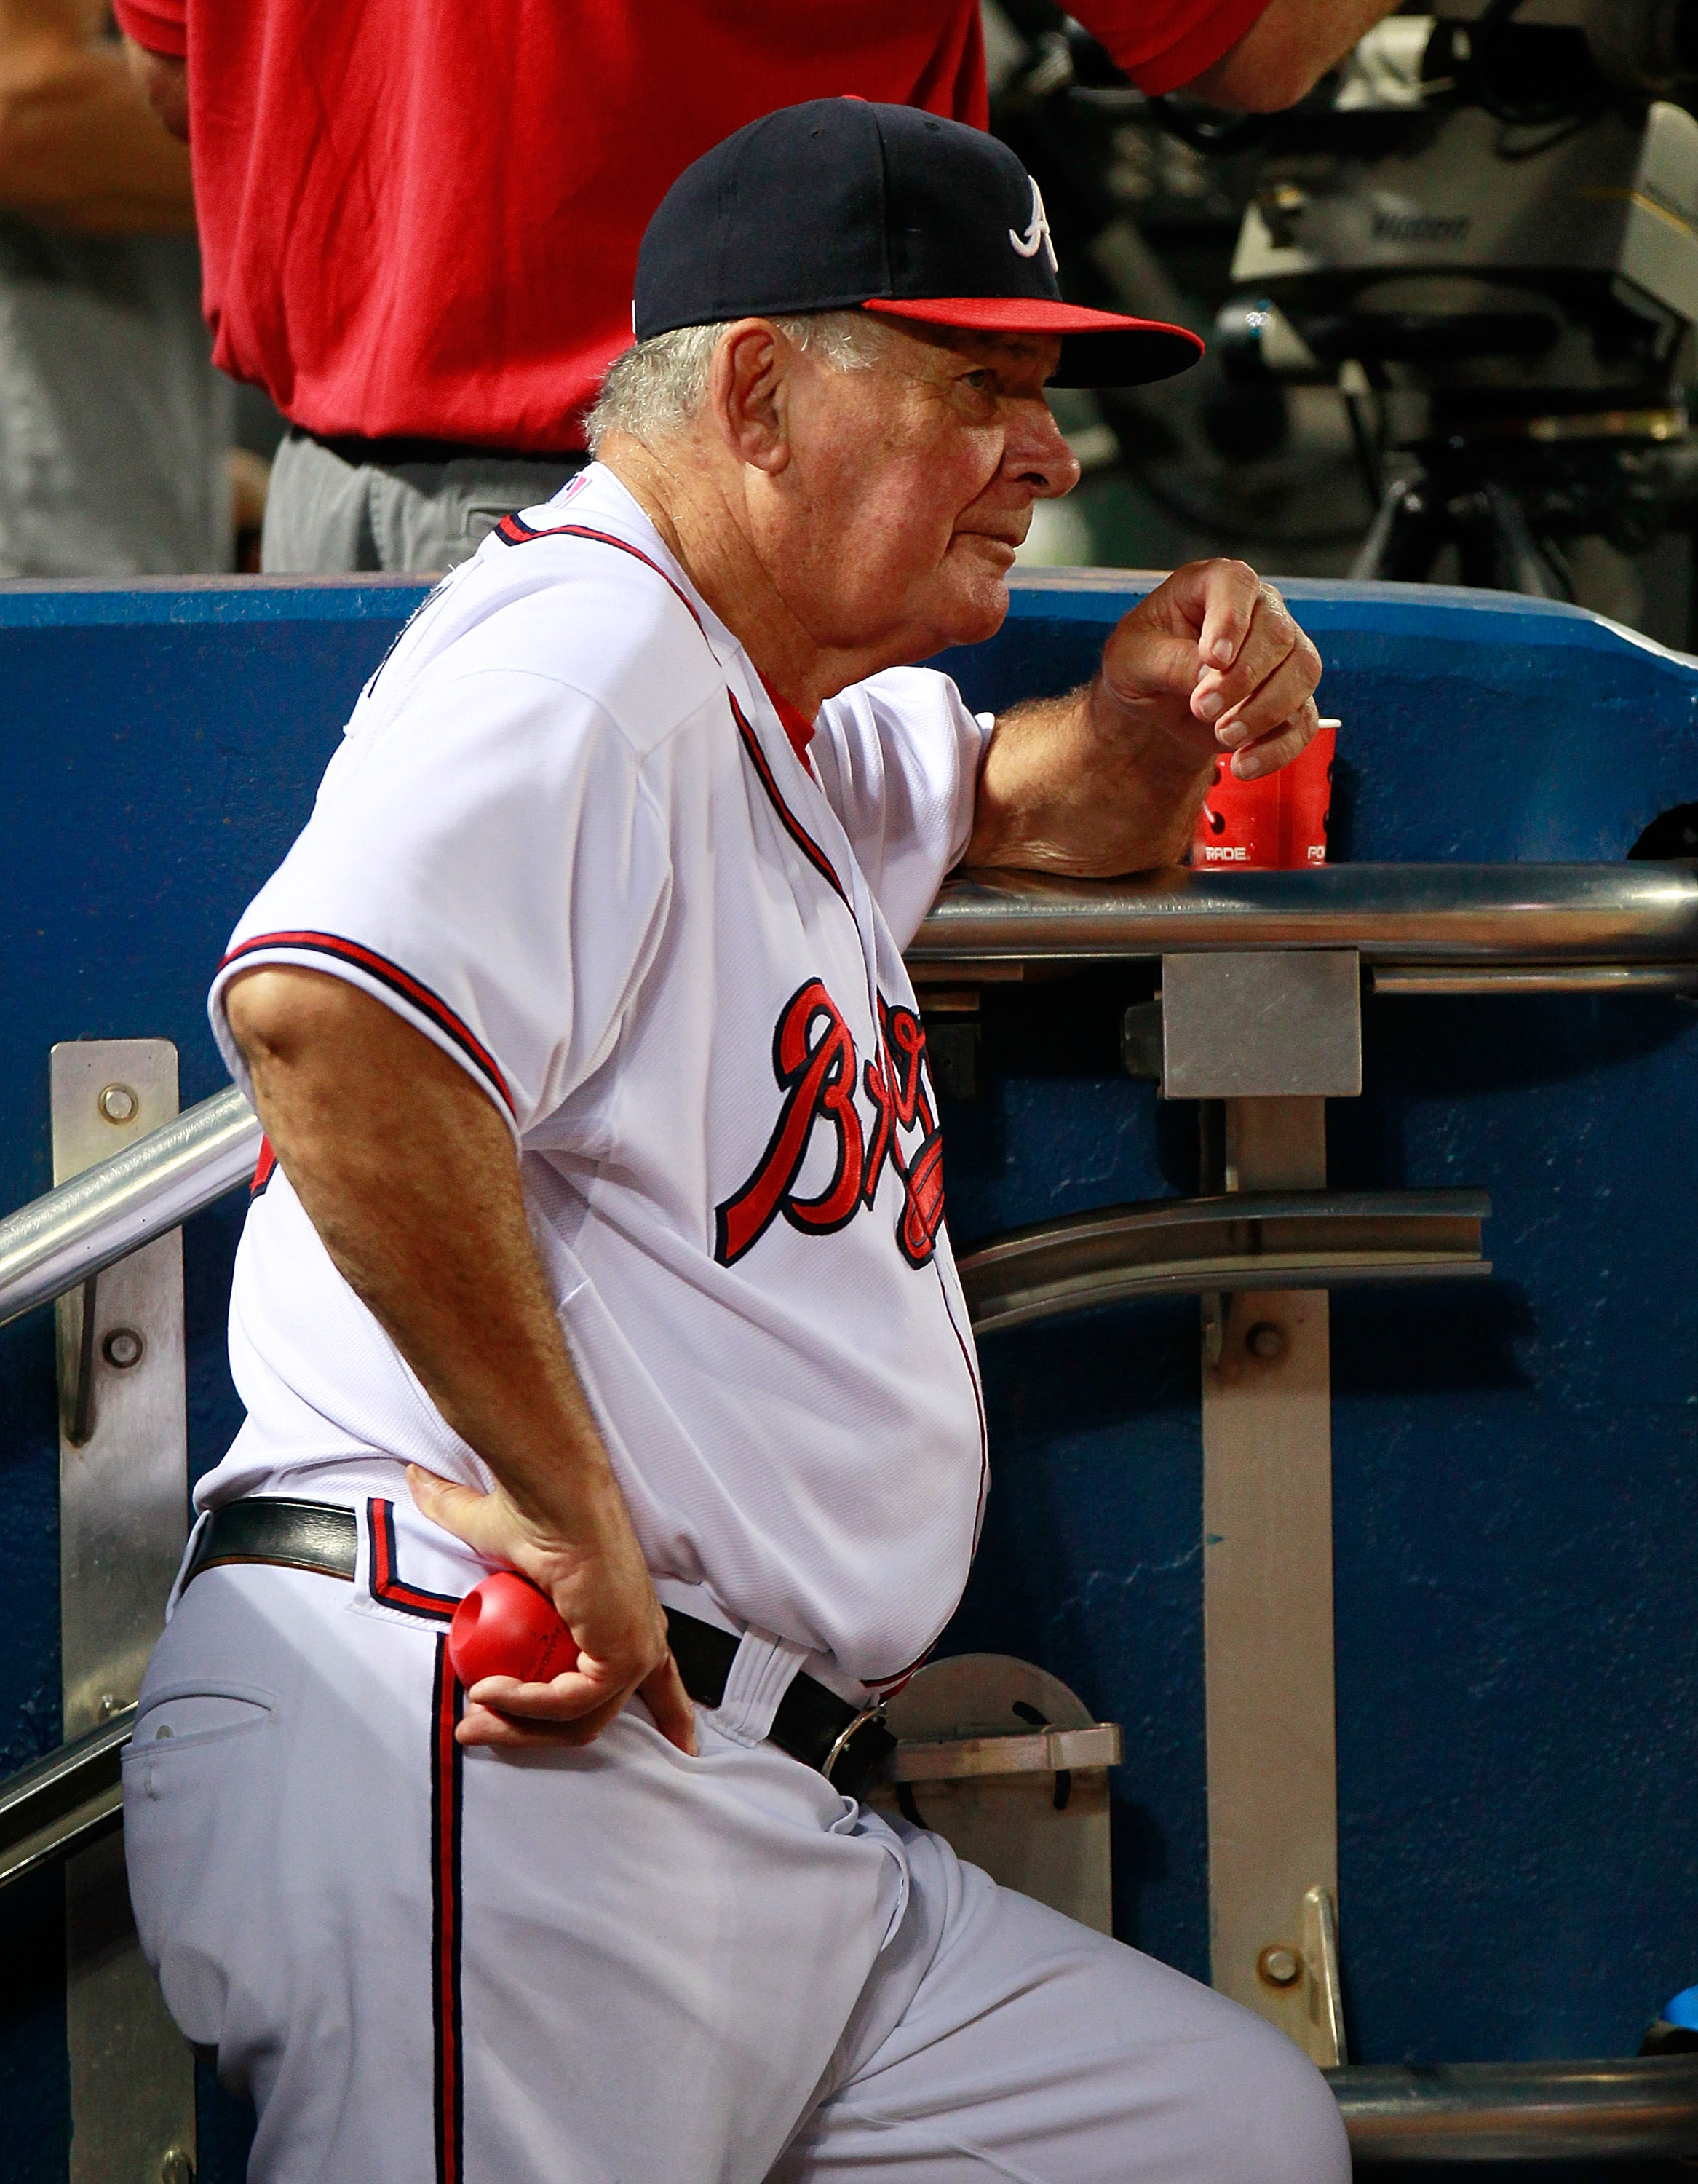 ATLANTA - AUGUST 31:  Manager Bobby Cox #6 of the Atlanta Braves watches from the dugout against the New York Mets at Turner Field on August 31, 2010 in Atlanta, Georgia.  (Photo by Kevin C. Cox/Getty Images)